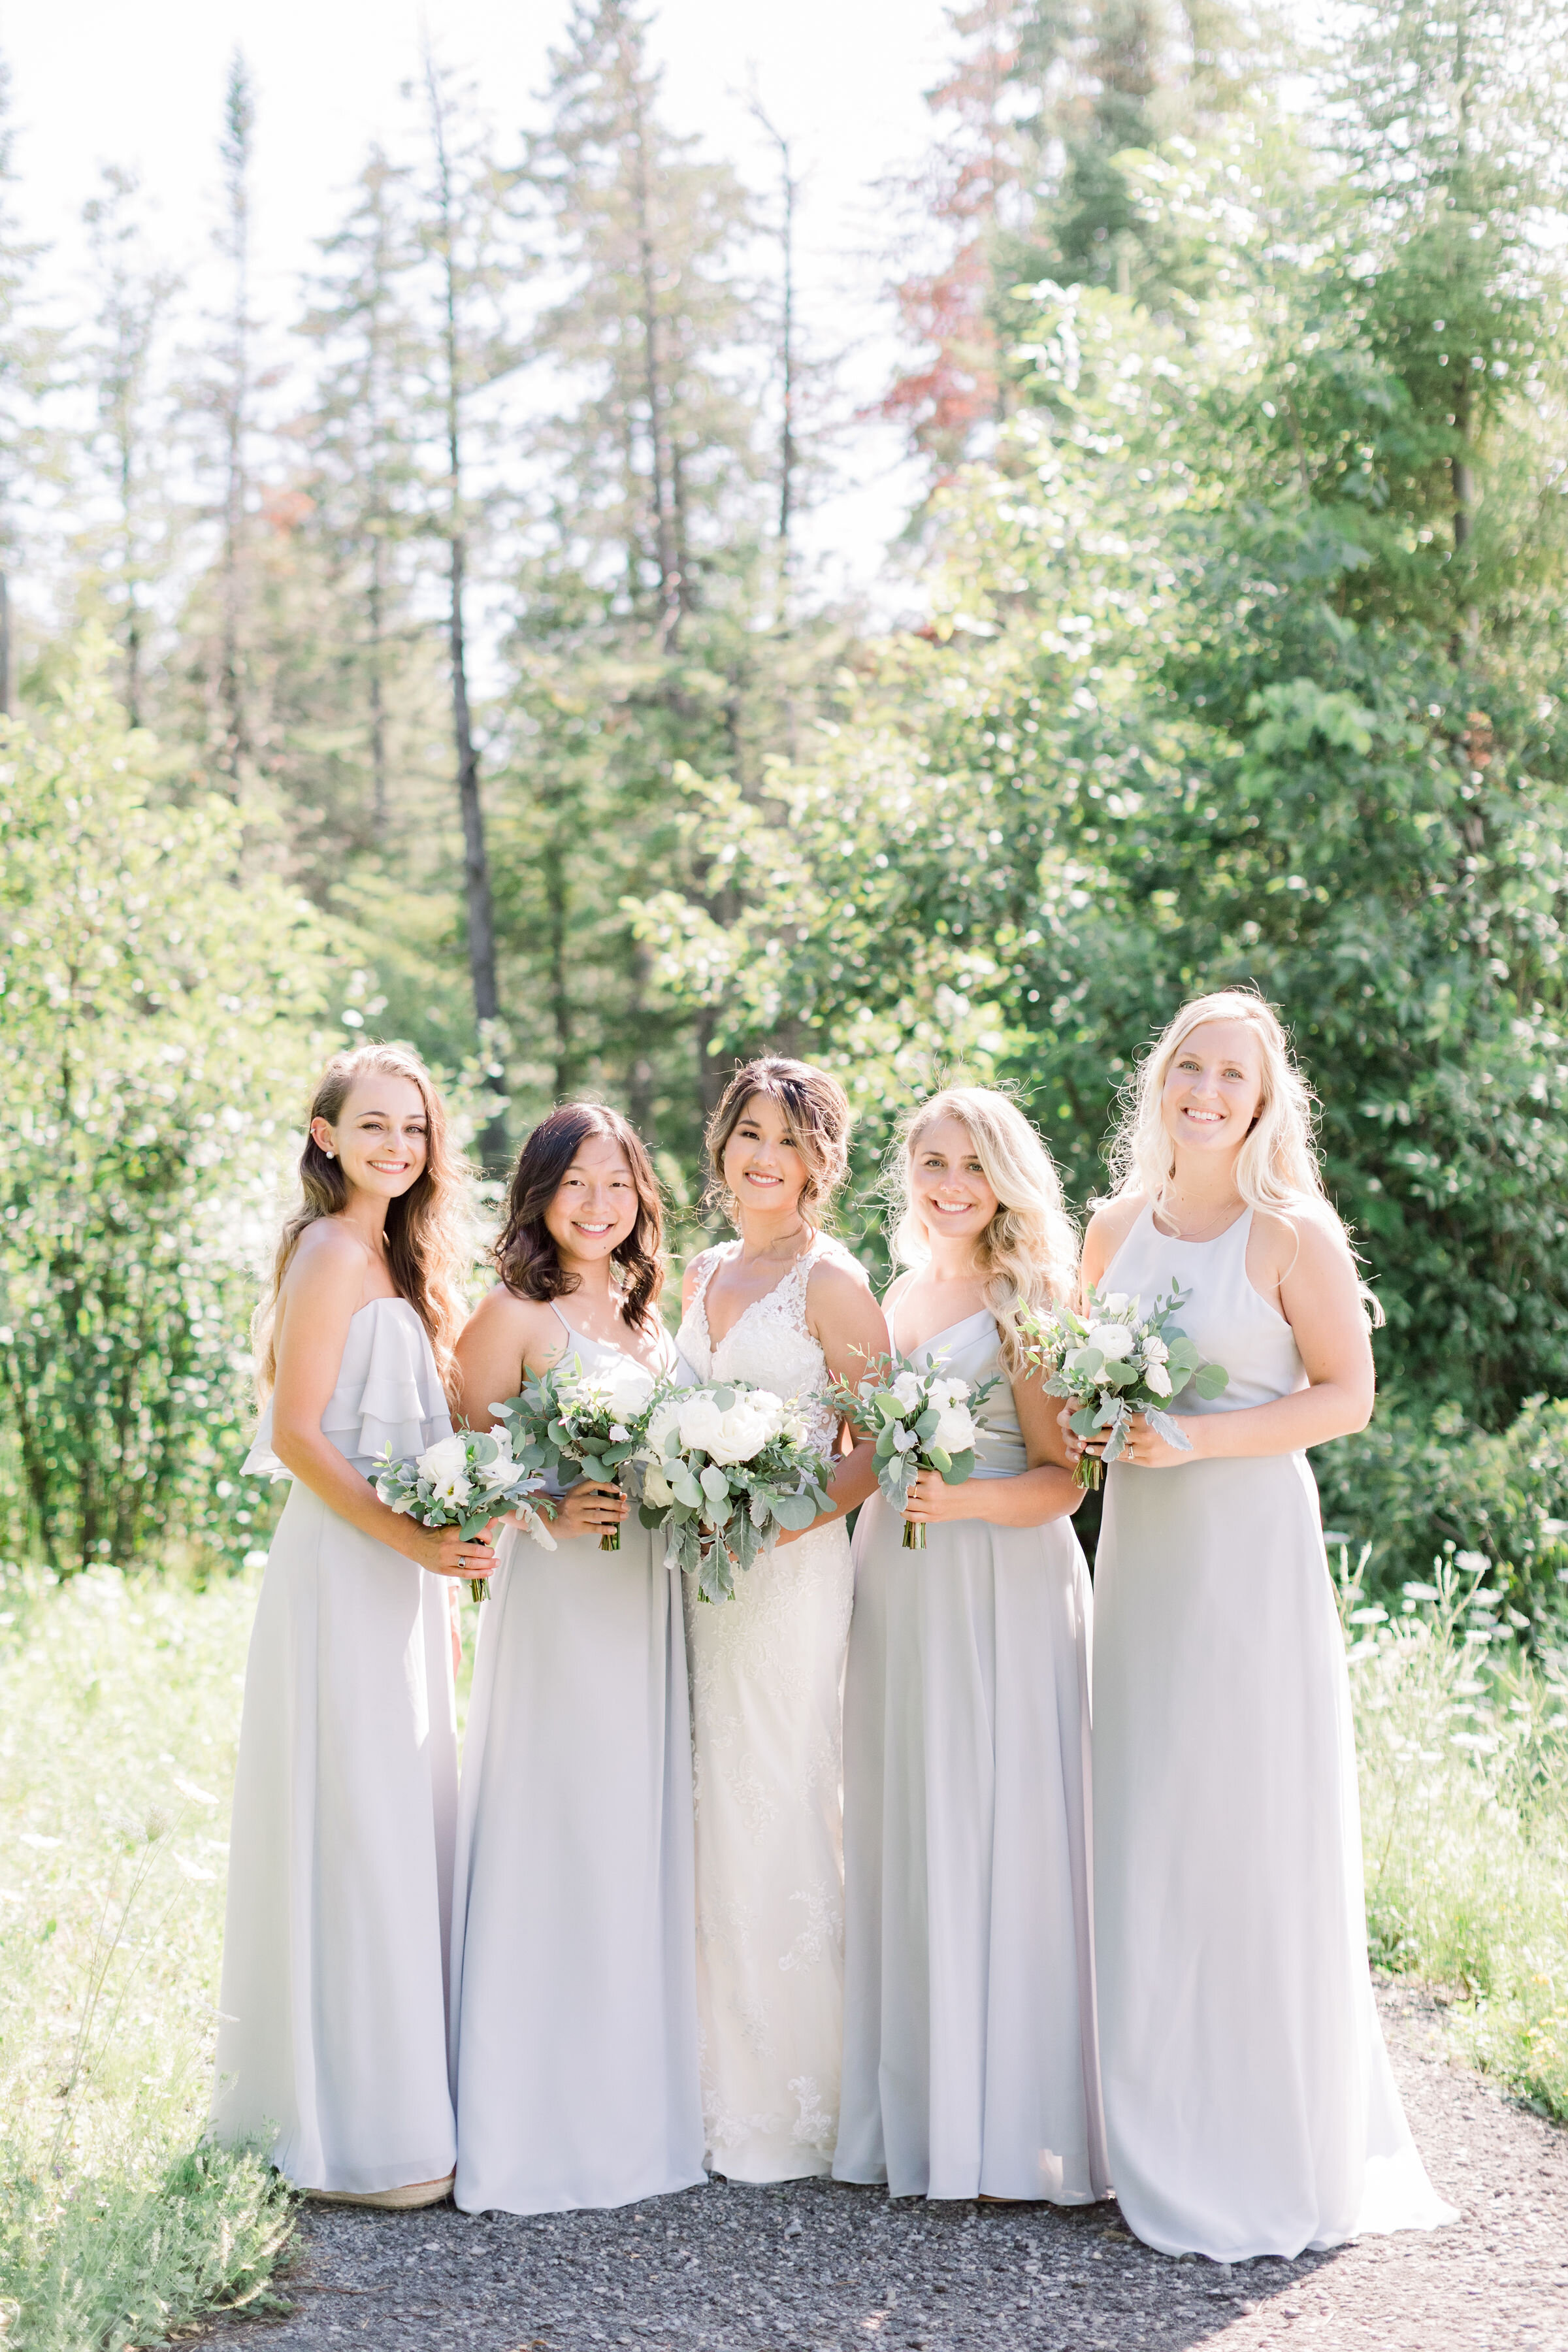  Beautiful bridesmaids in matching silver or gray wedding dresses with white flower bouquet by Chelsea Mason Photography in Ottawa, ON. bridesmaid outfits dresses for bridesmaid gray wedding colors neutral wedding colors white and silver wedding colo